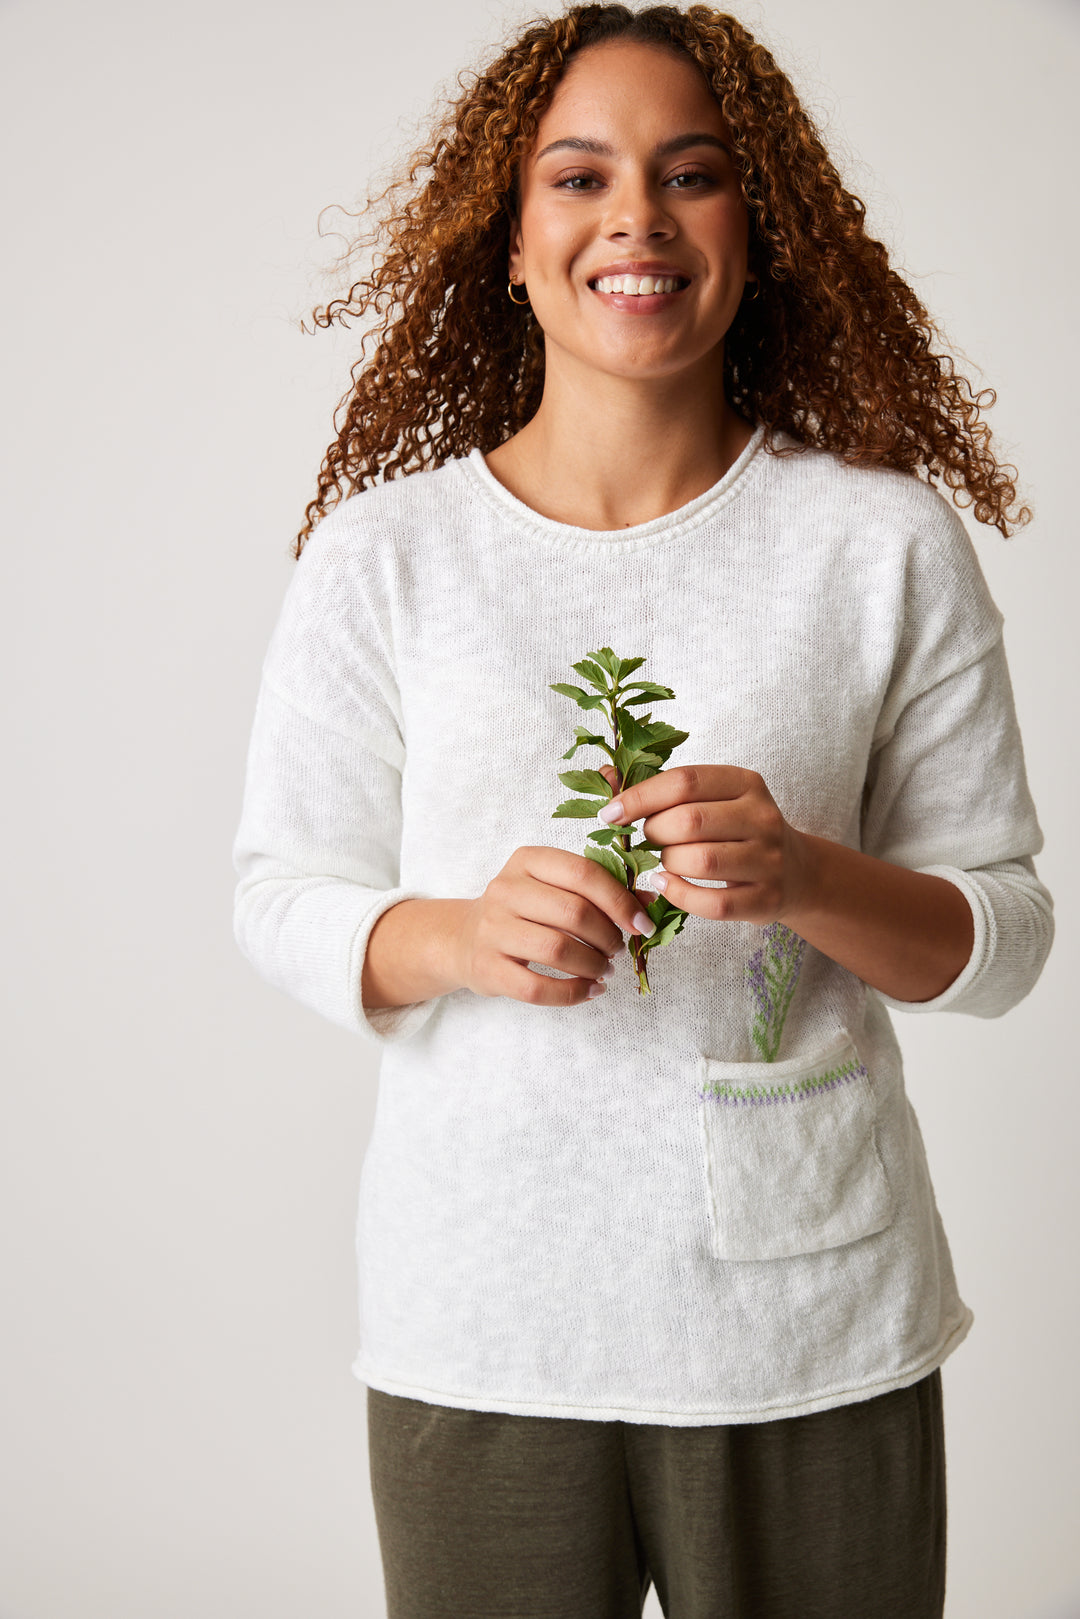 Made from light sweater knit fabric, this top is both cozy and stylish. 